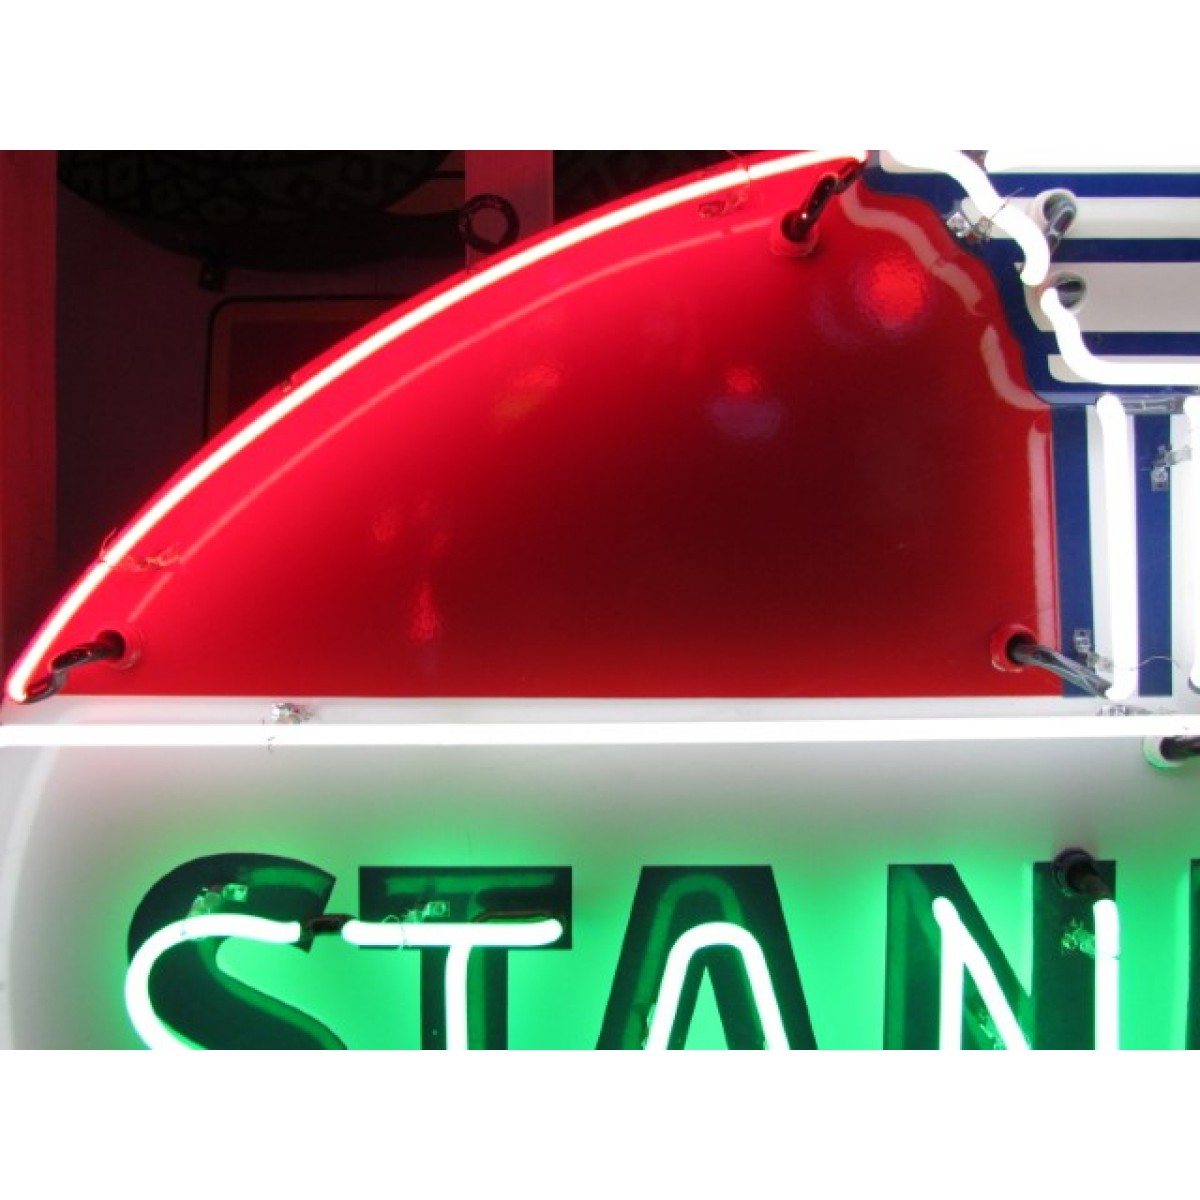 Free Images : car, number, truck, red, color, signage, neon sign